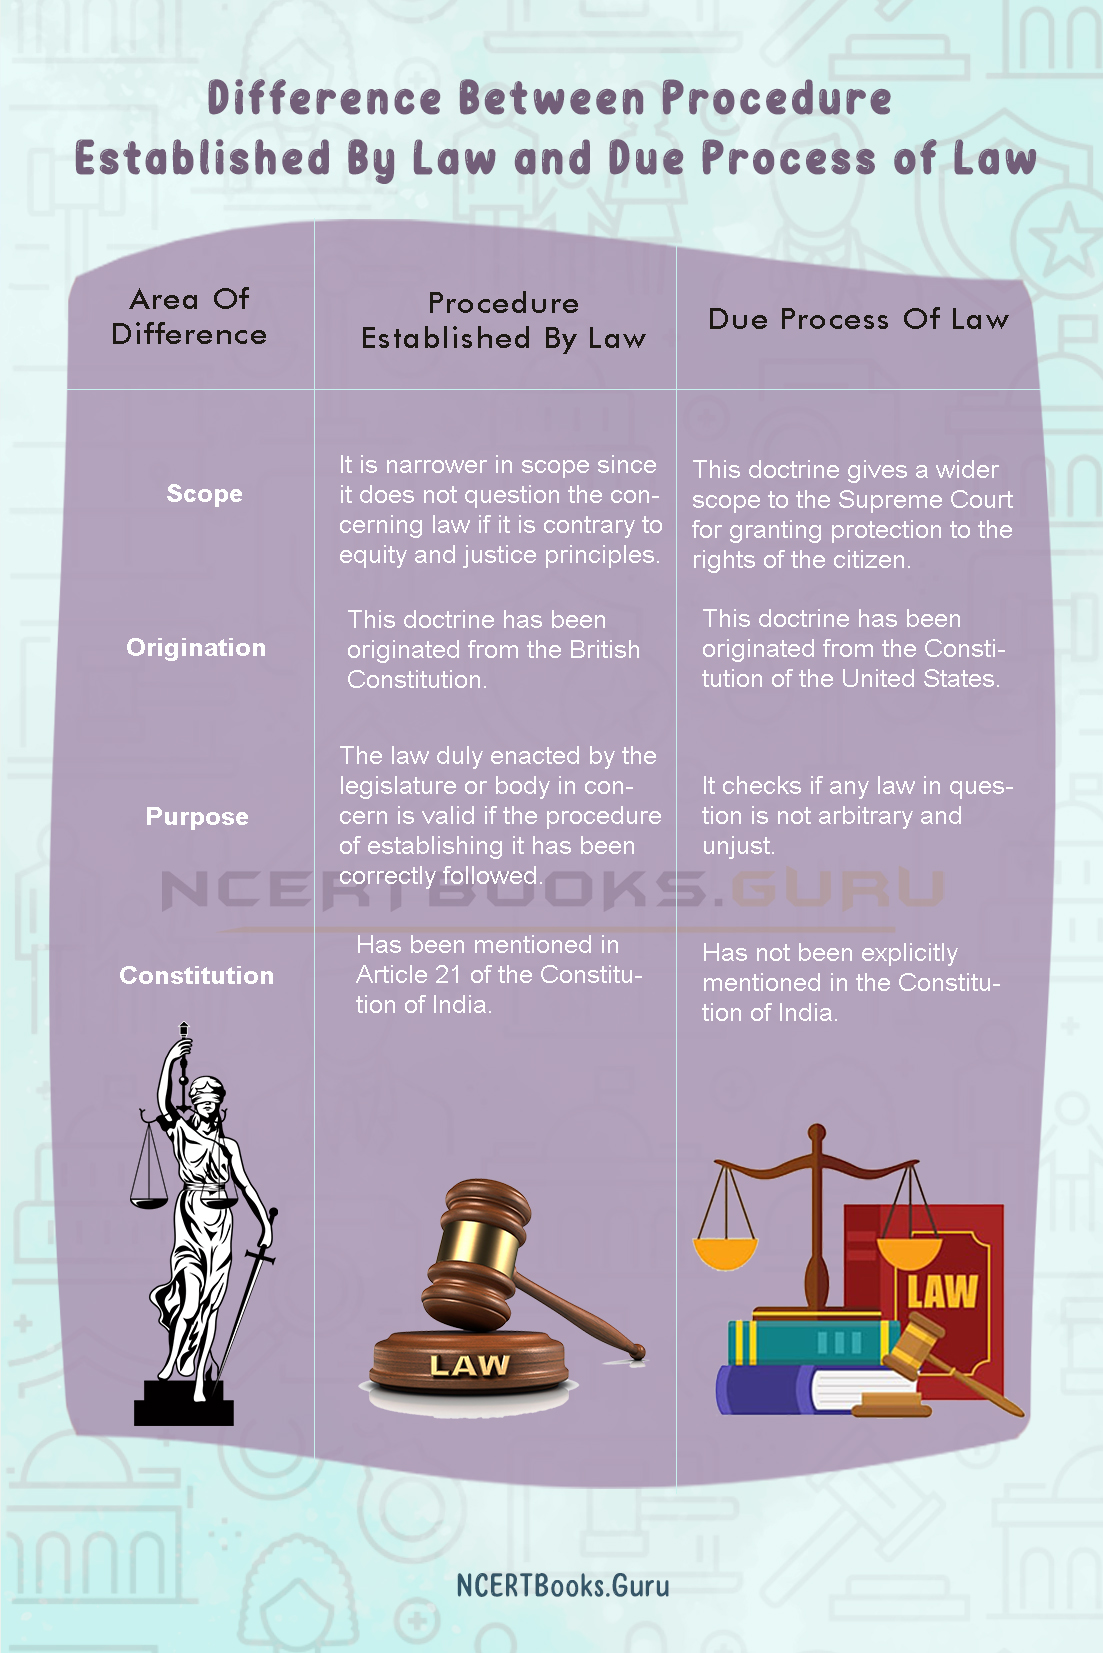 Difference Between Procedure Established By Law and Due Process of Law 2